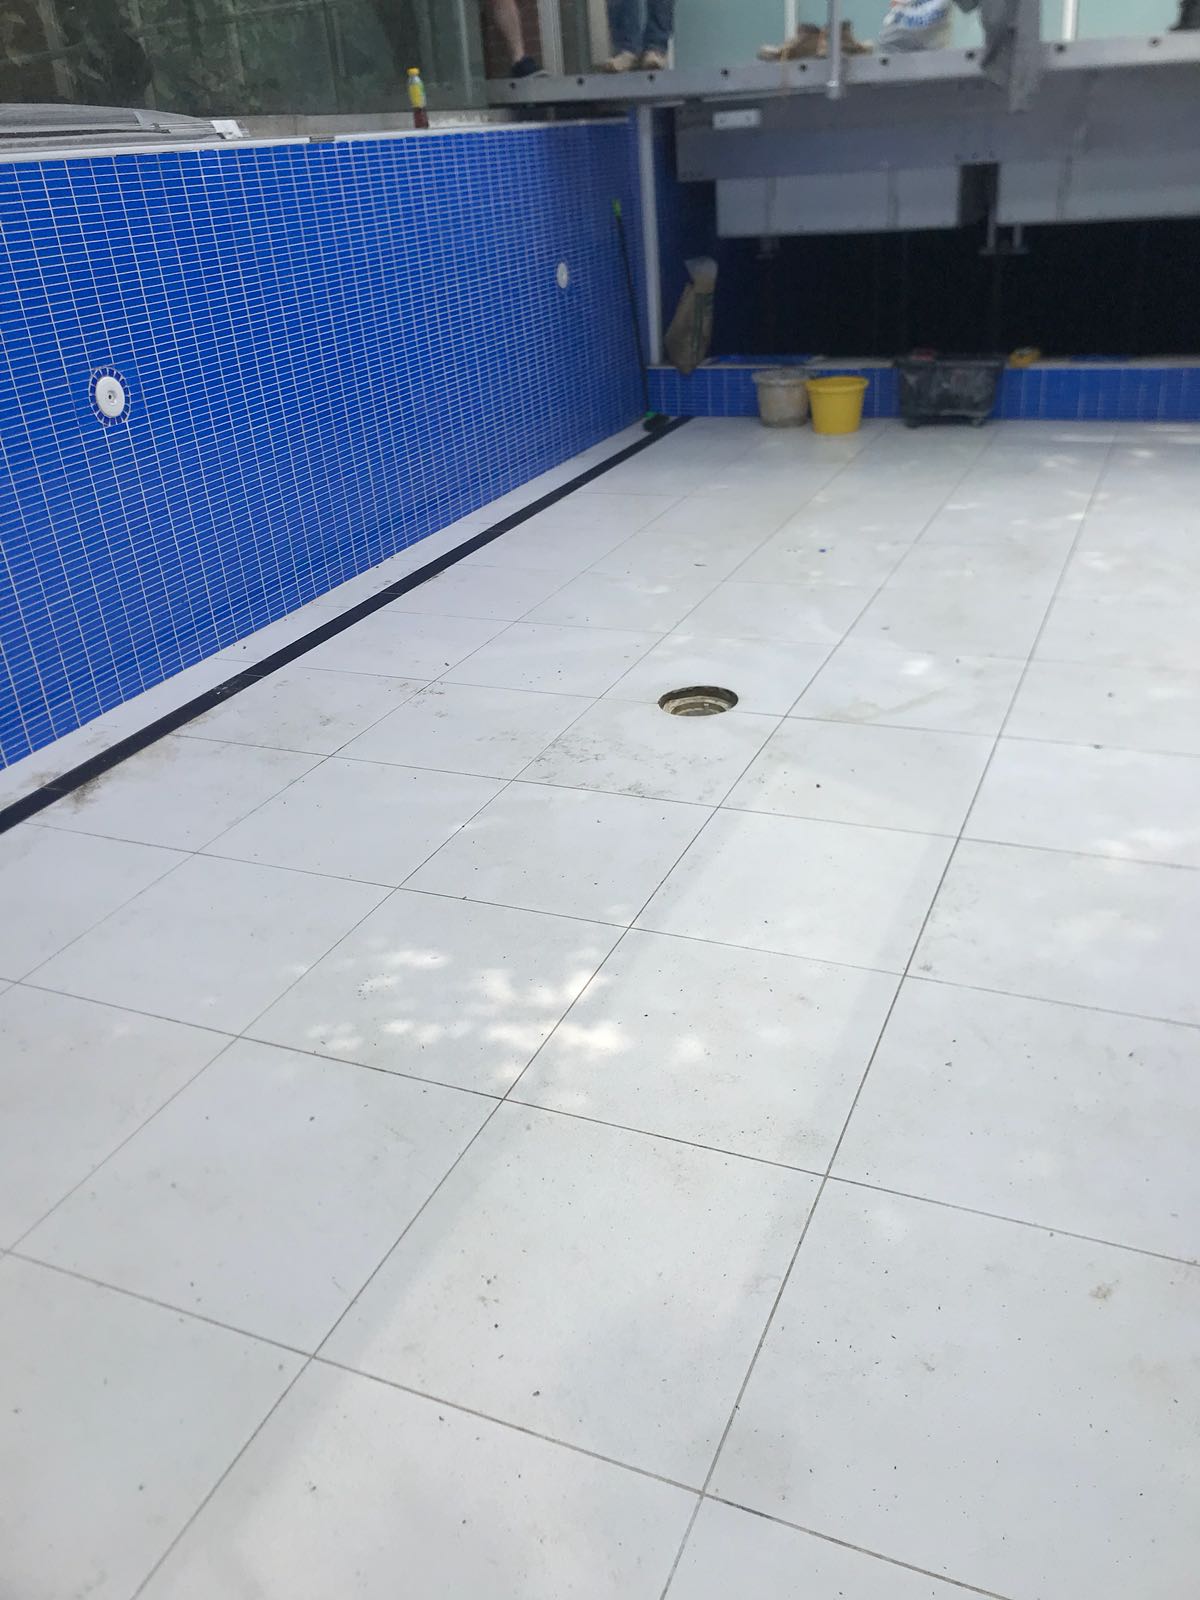 Swimming Pool & Spa Tiling Contractor